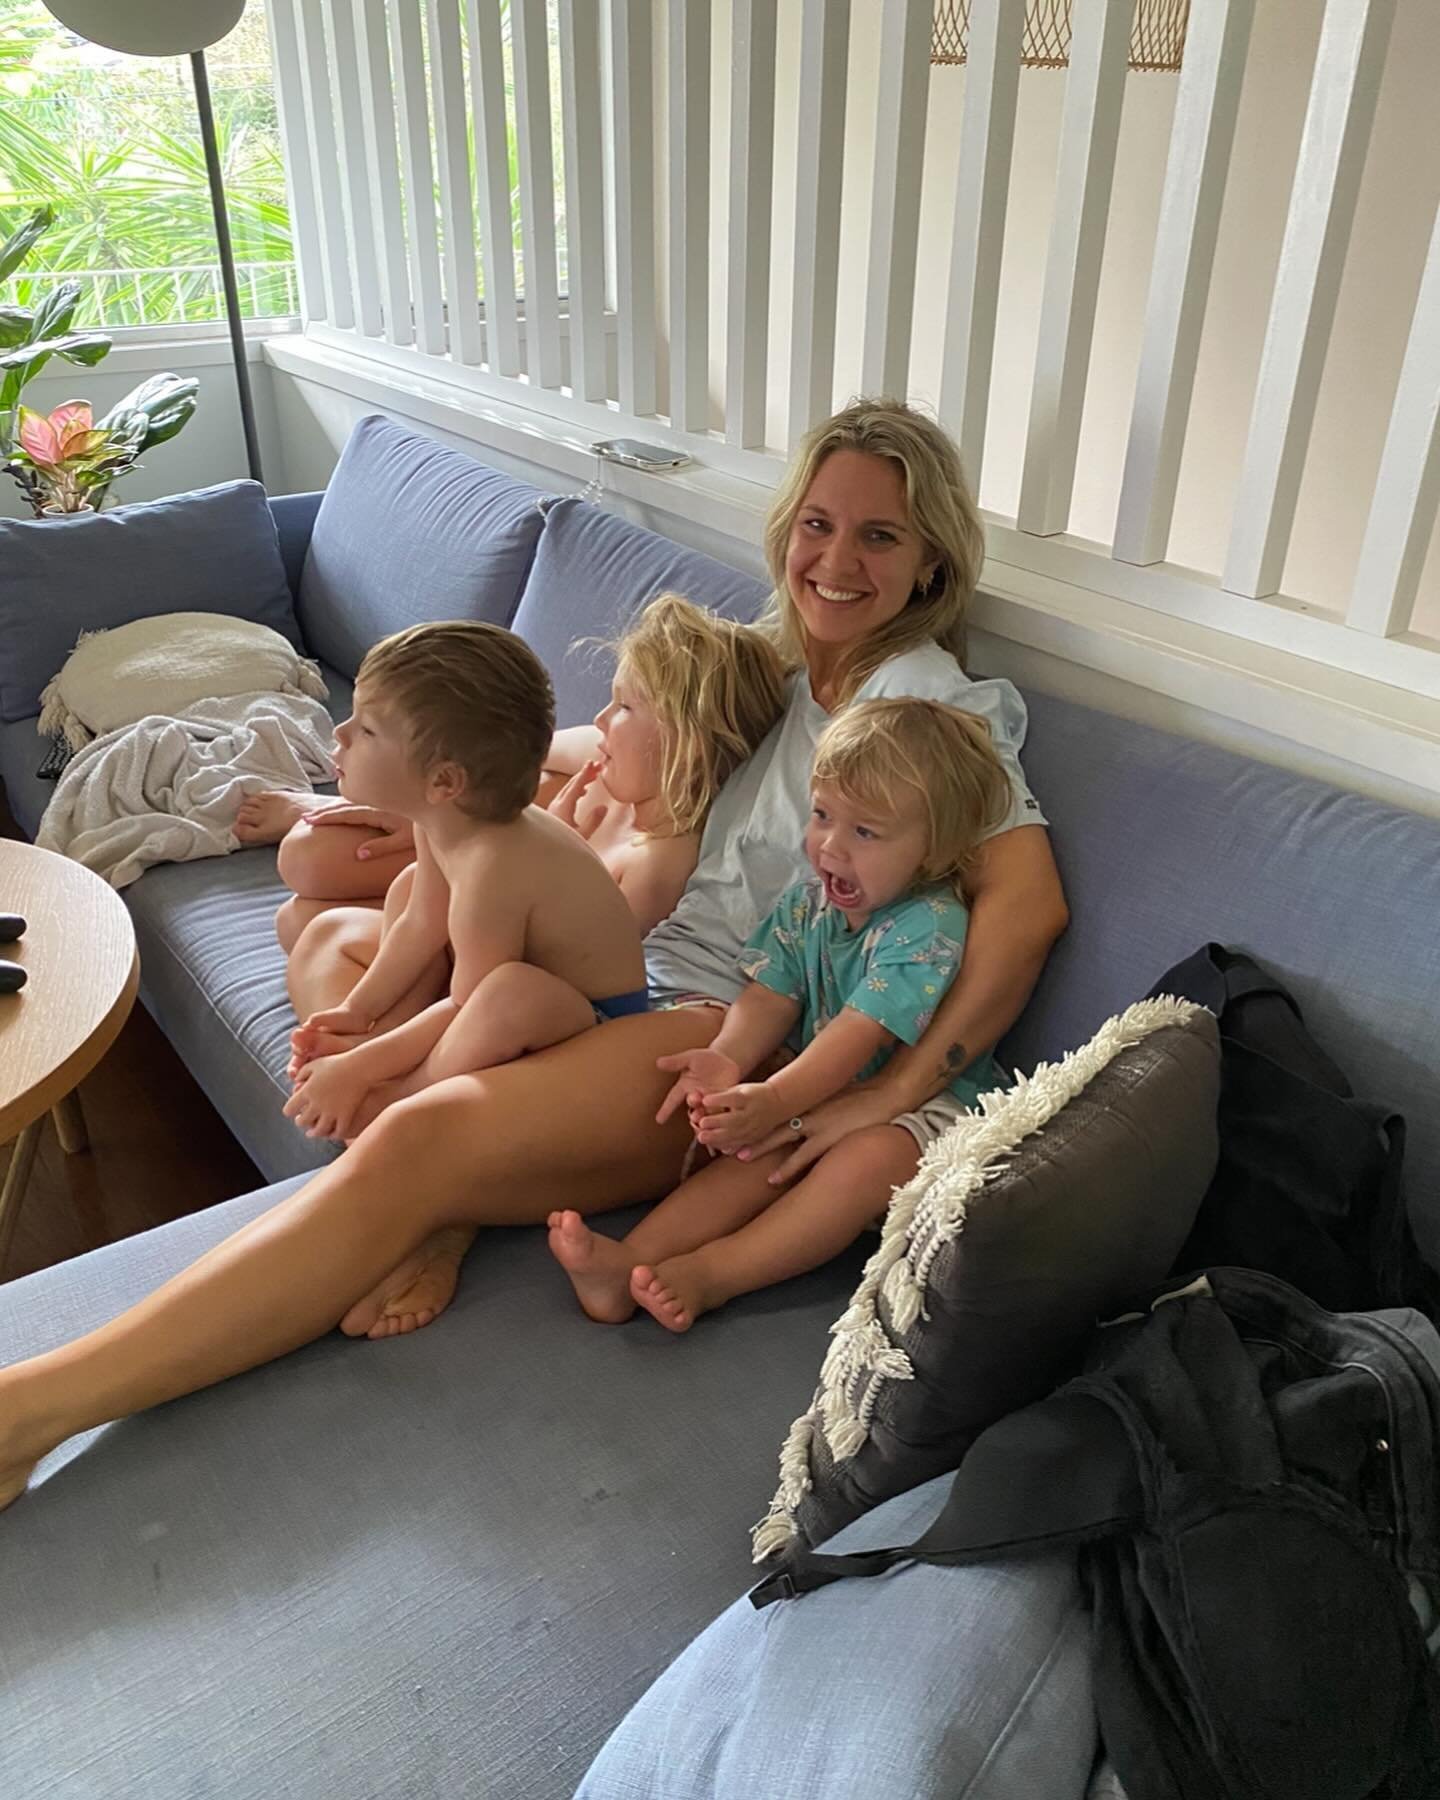 Happy Mother&rsquo;s Day to my dear Ann Ann @annieredhead__ 

Your ability to mum is second to none. The amount of energy you put into active parenting is one of the things I love about you. Abbie, Hugo, Freyja and I could not be in a more loved and 